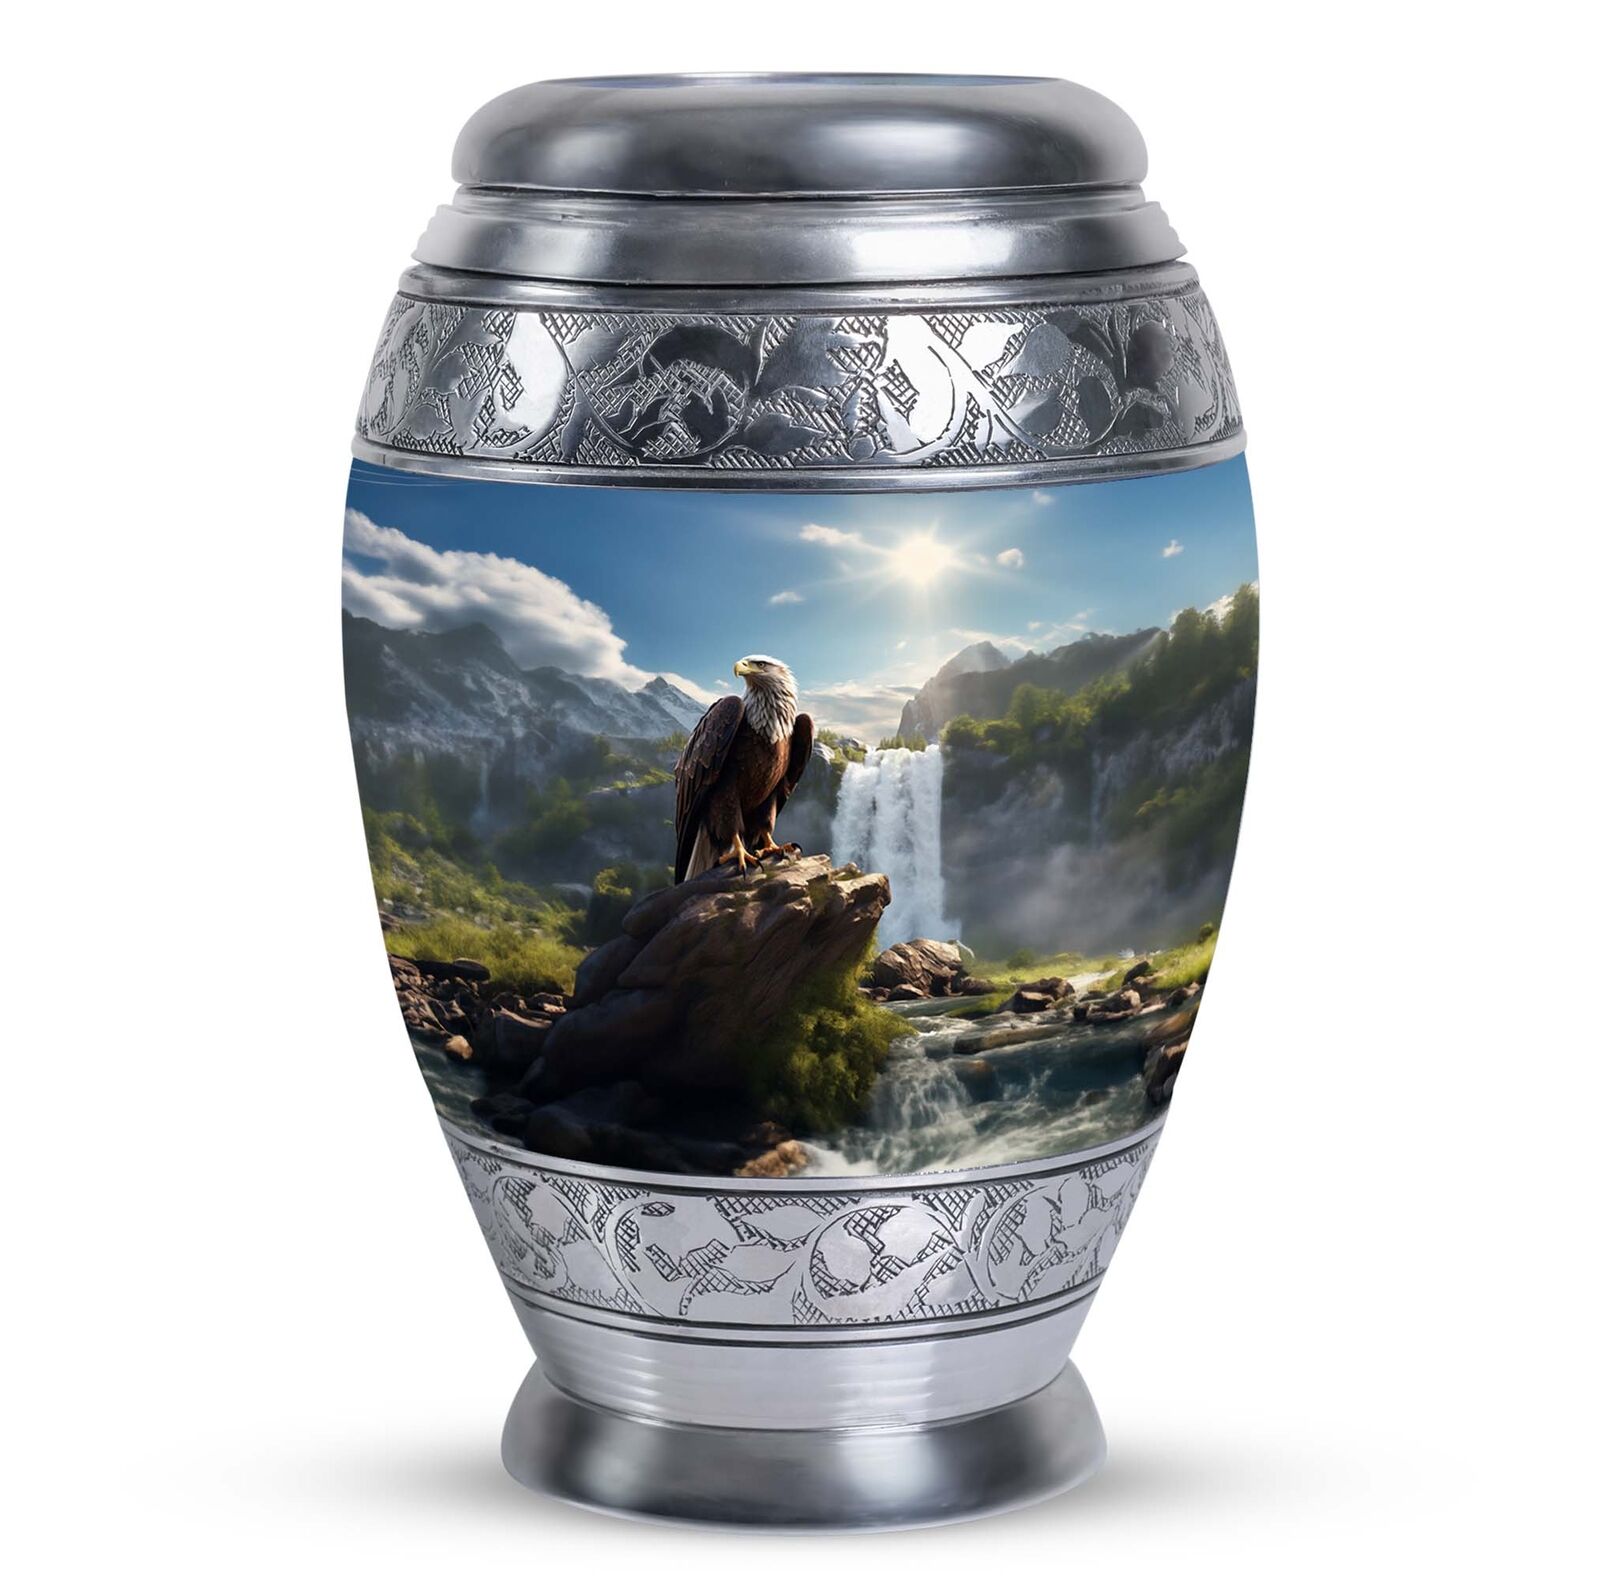 Burial Urns For Human Eagle Sitting In Front Of Waterfall (10 Inch) Large Urn